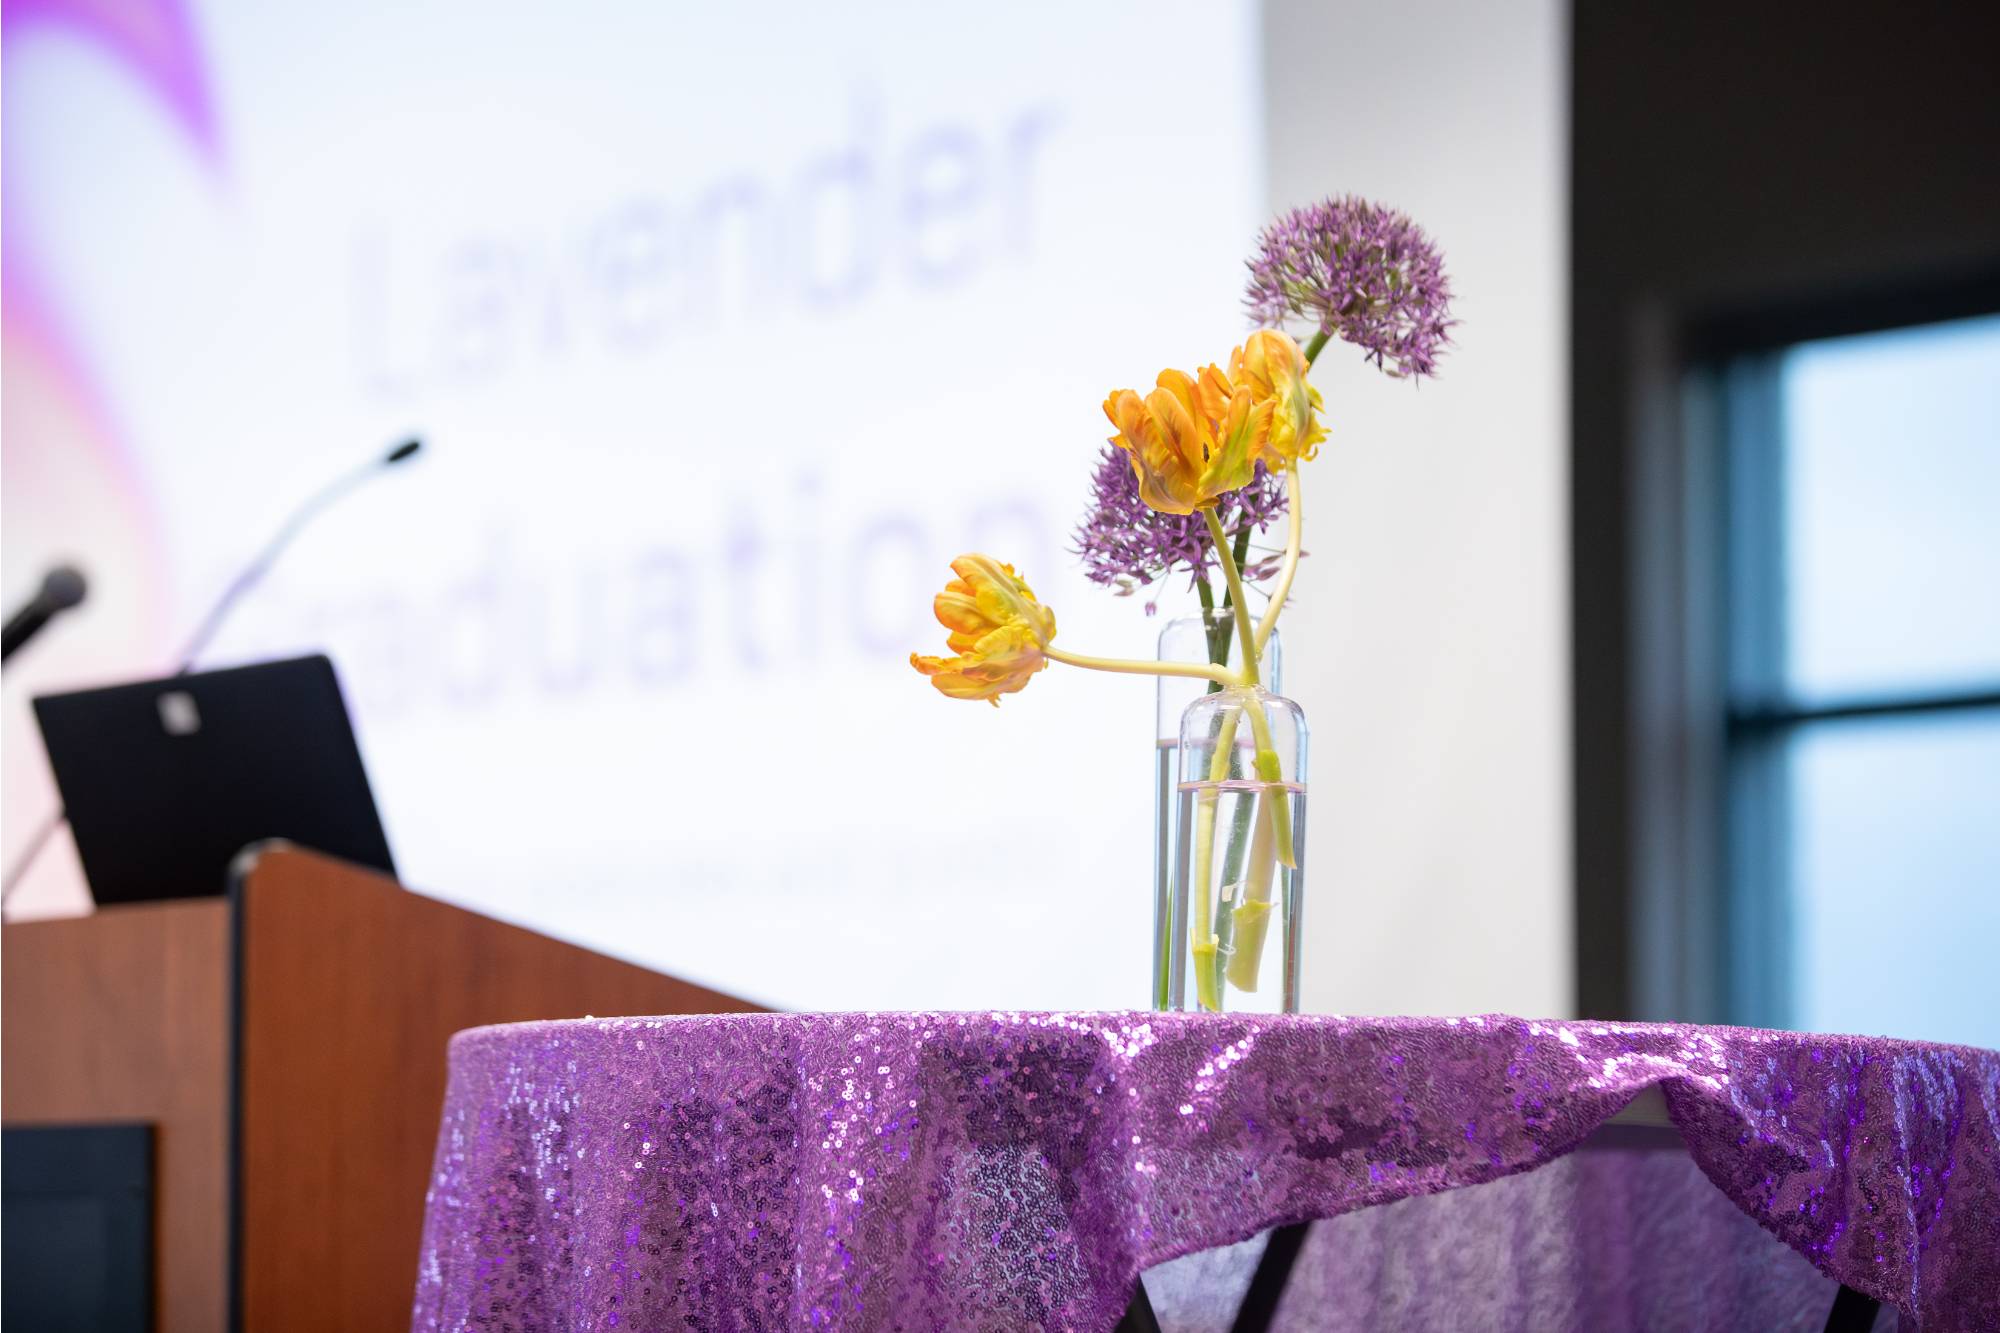 Lav Grad powerpoint in the background with a sparkly purple tablecloth with flower arrangement in foreground